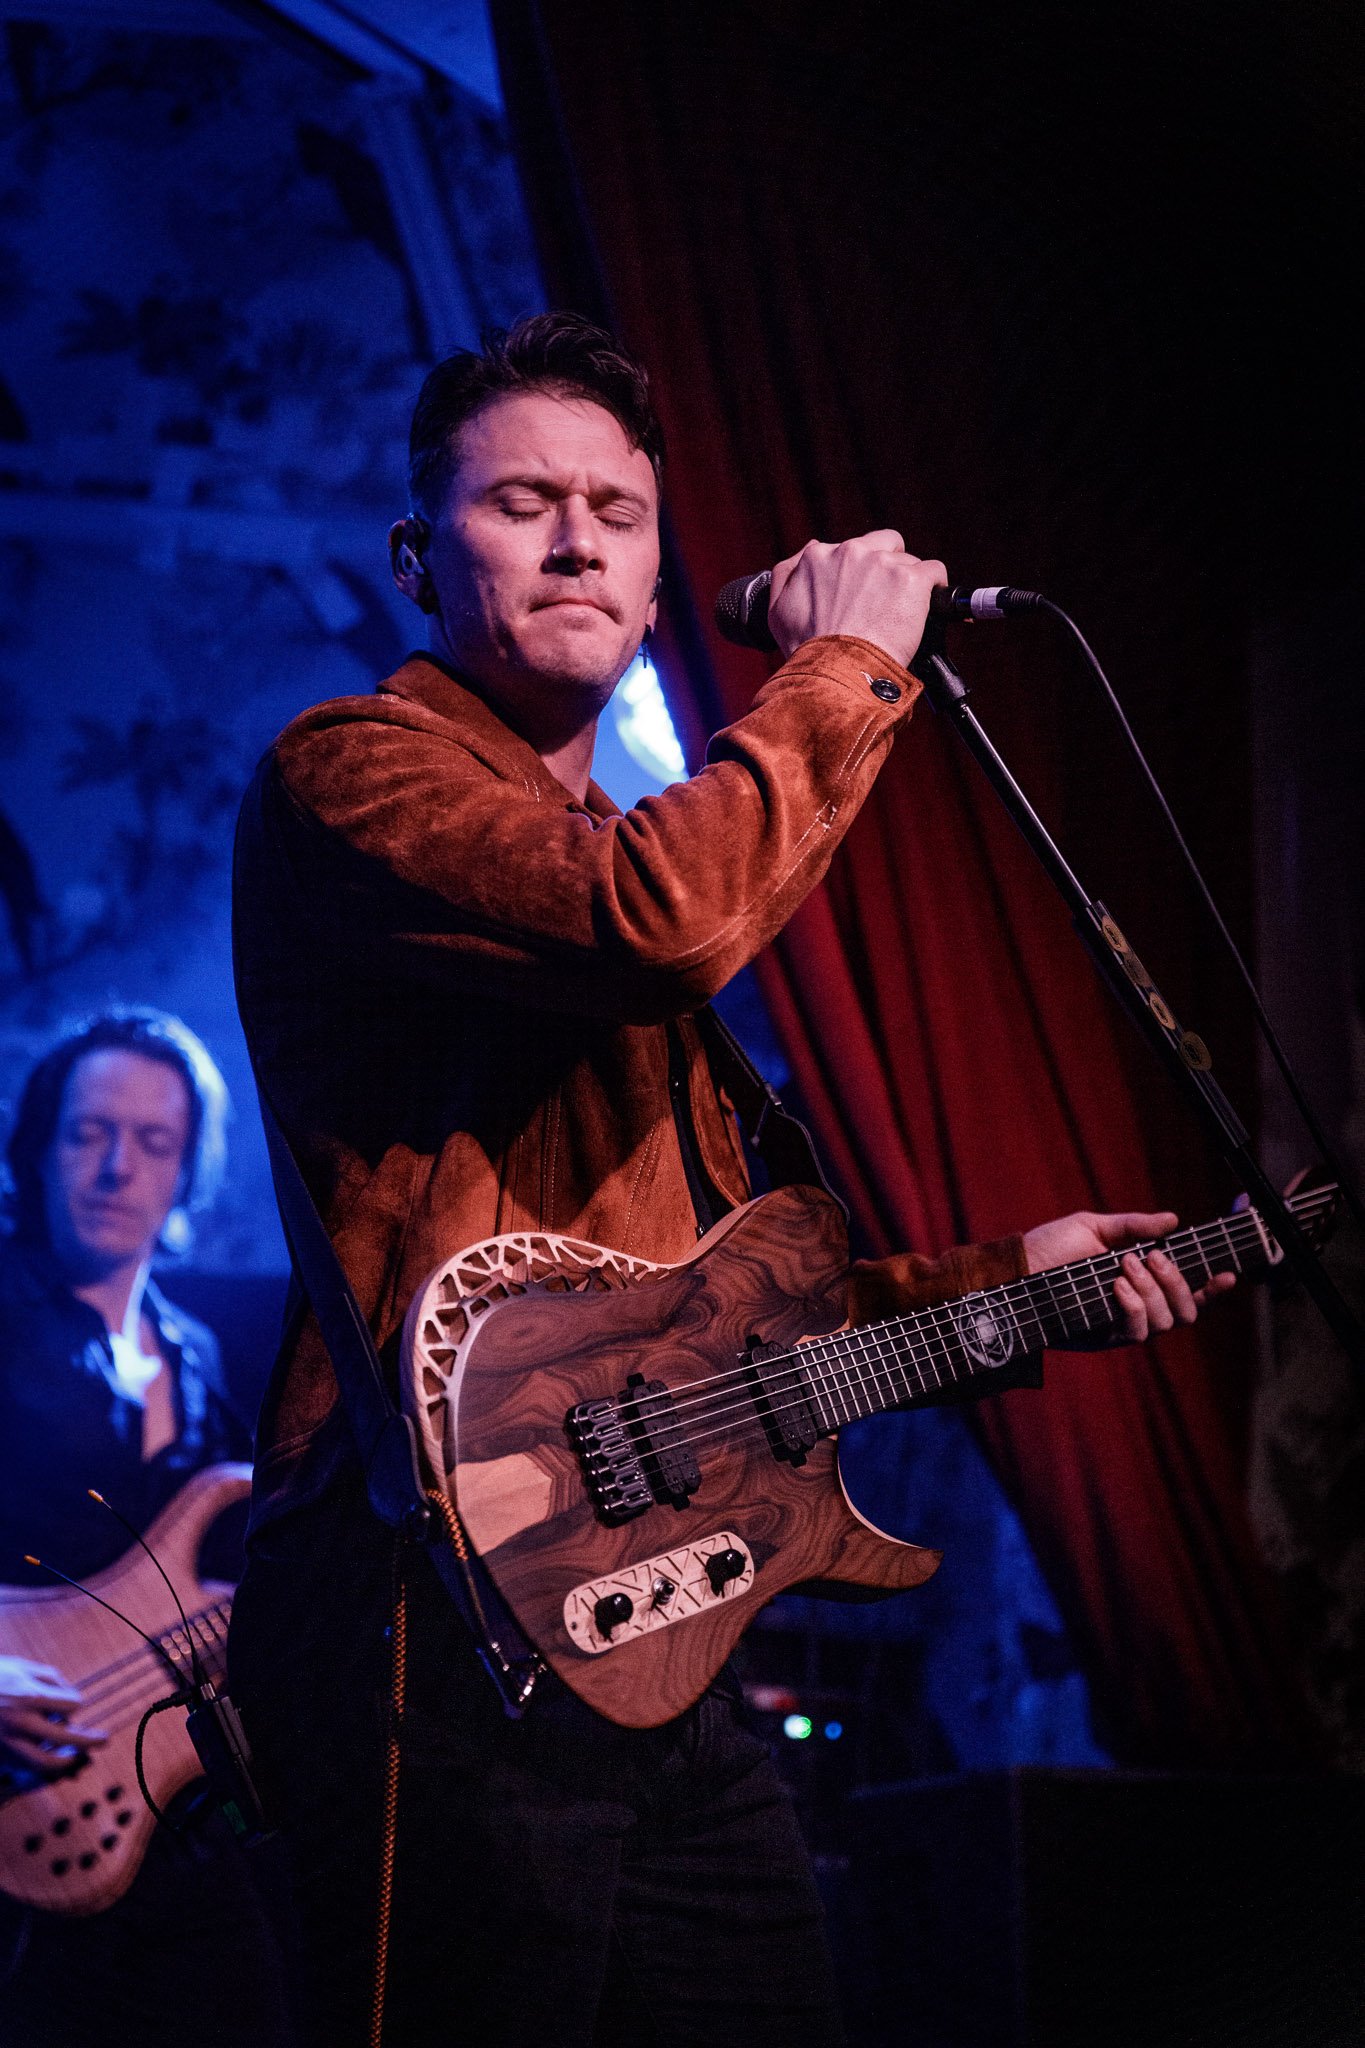 Daniel Tompkins at the Deaf Institute in Manchester on January 2